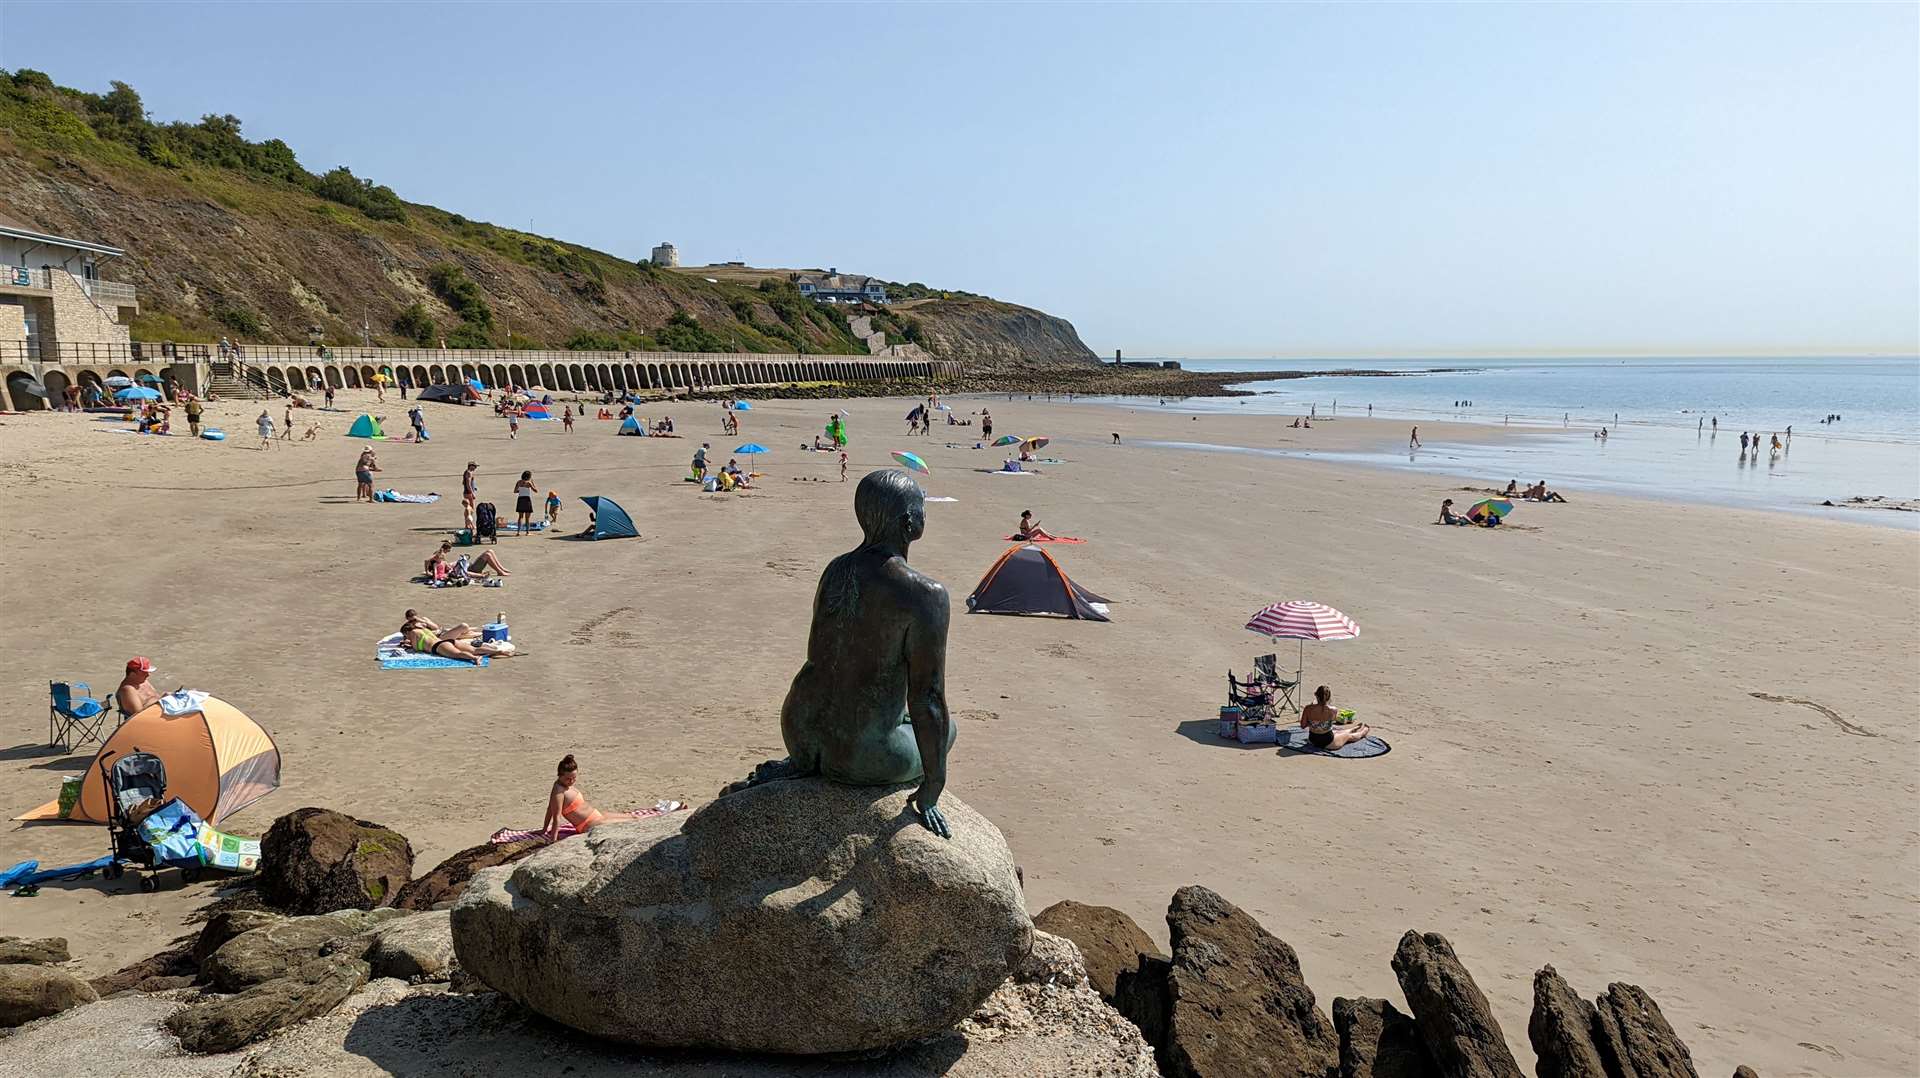 Bathing water in Folkestone has been impacted by the storm sewage release